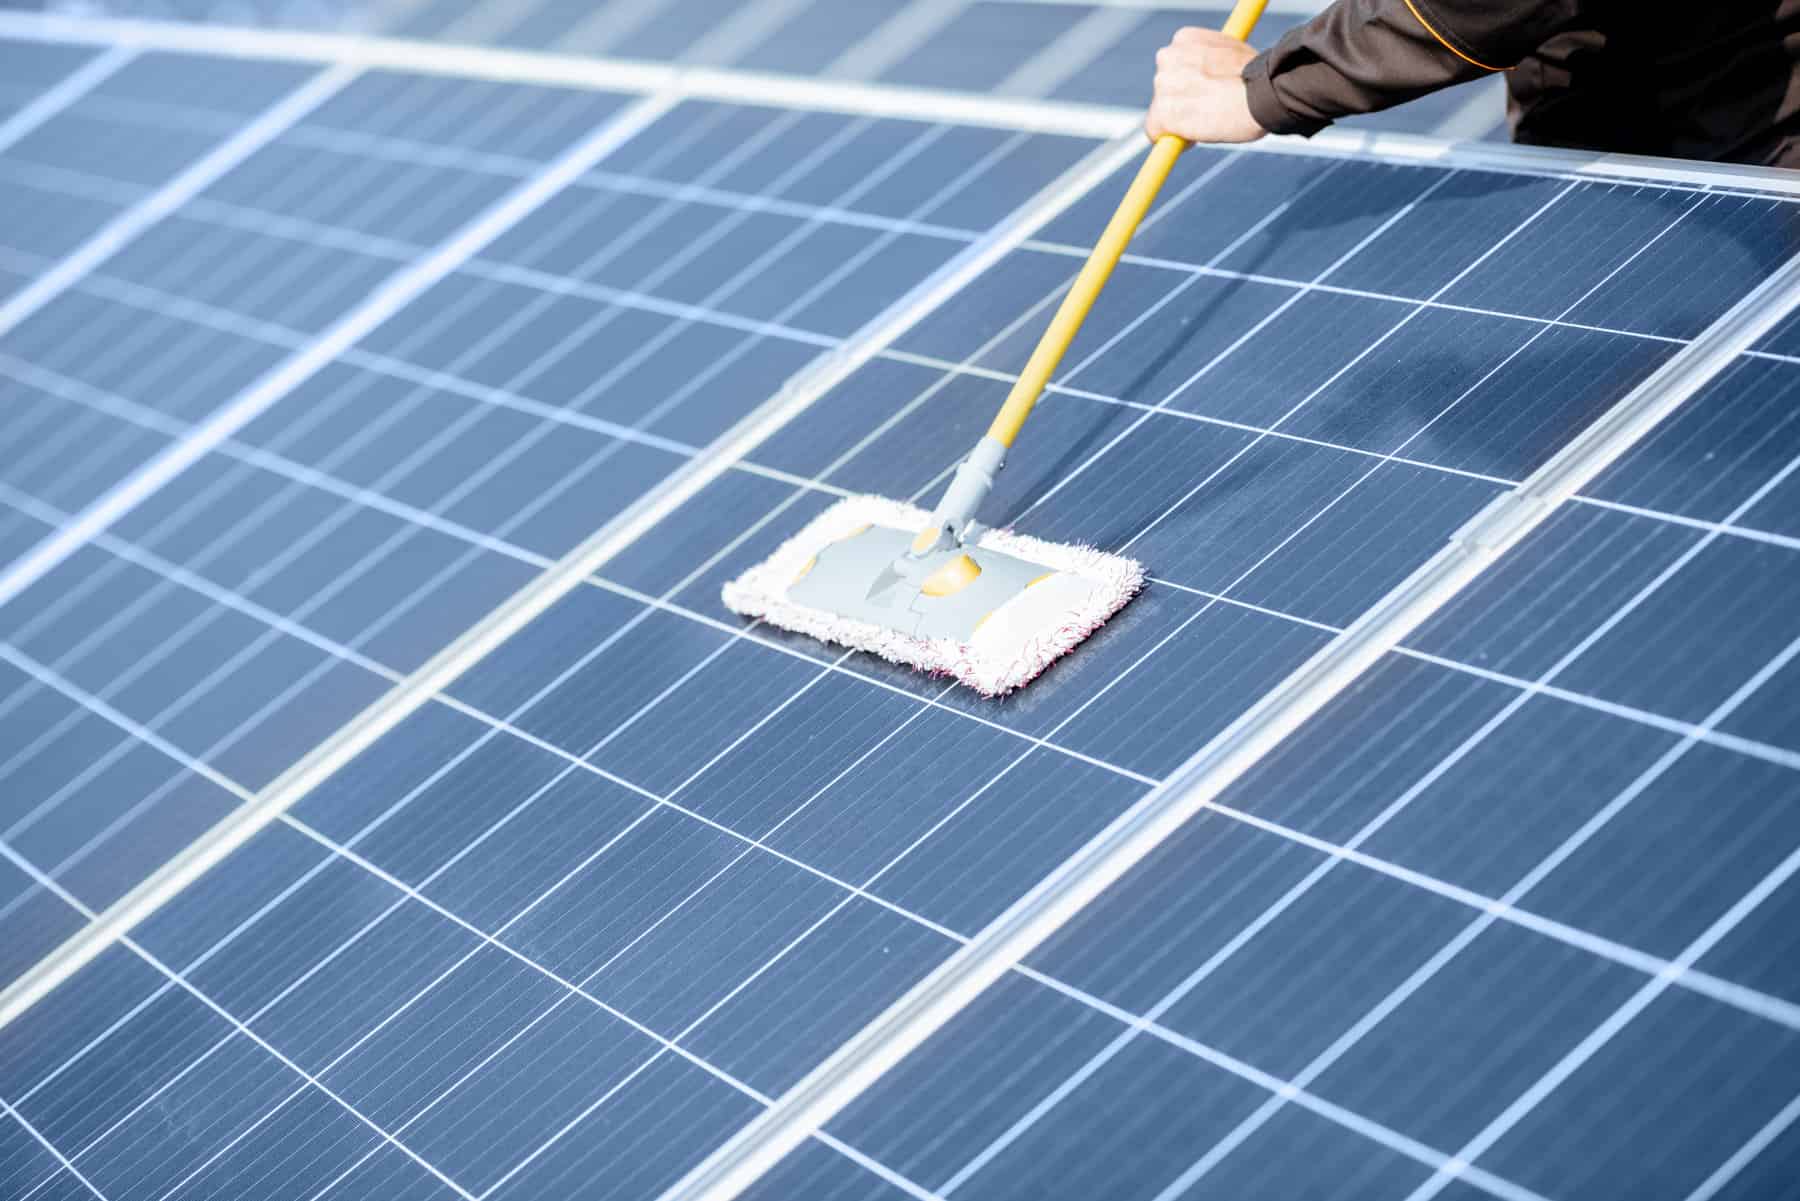 Featured image for “Empower Your Energy: How to Maintain and Repair Solar Panels”